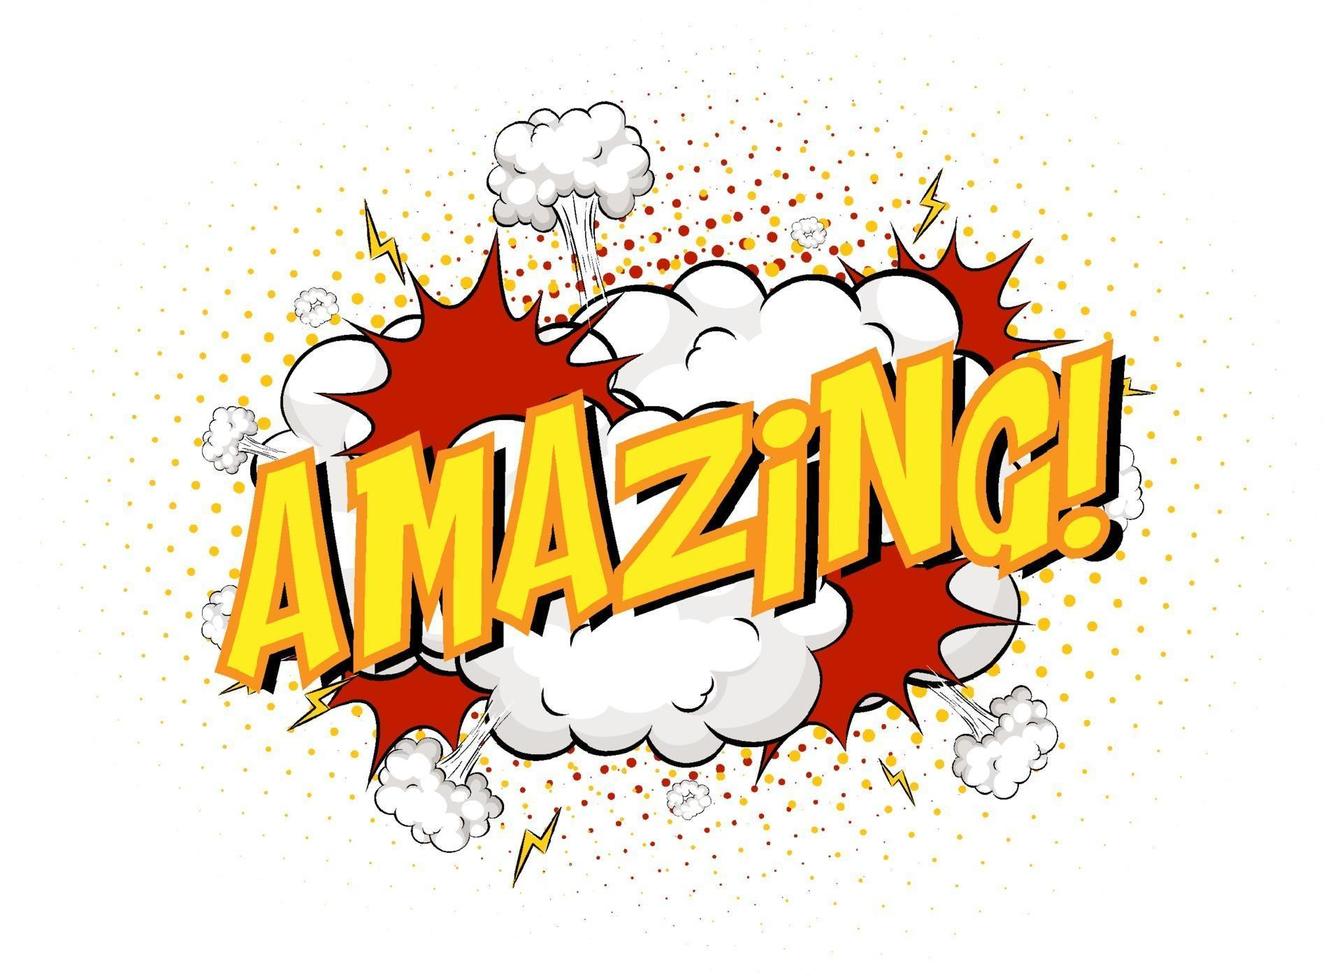 Word Amazing on comic cloud explosion background vector